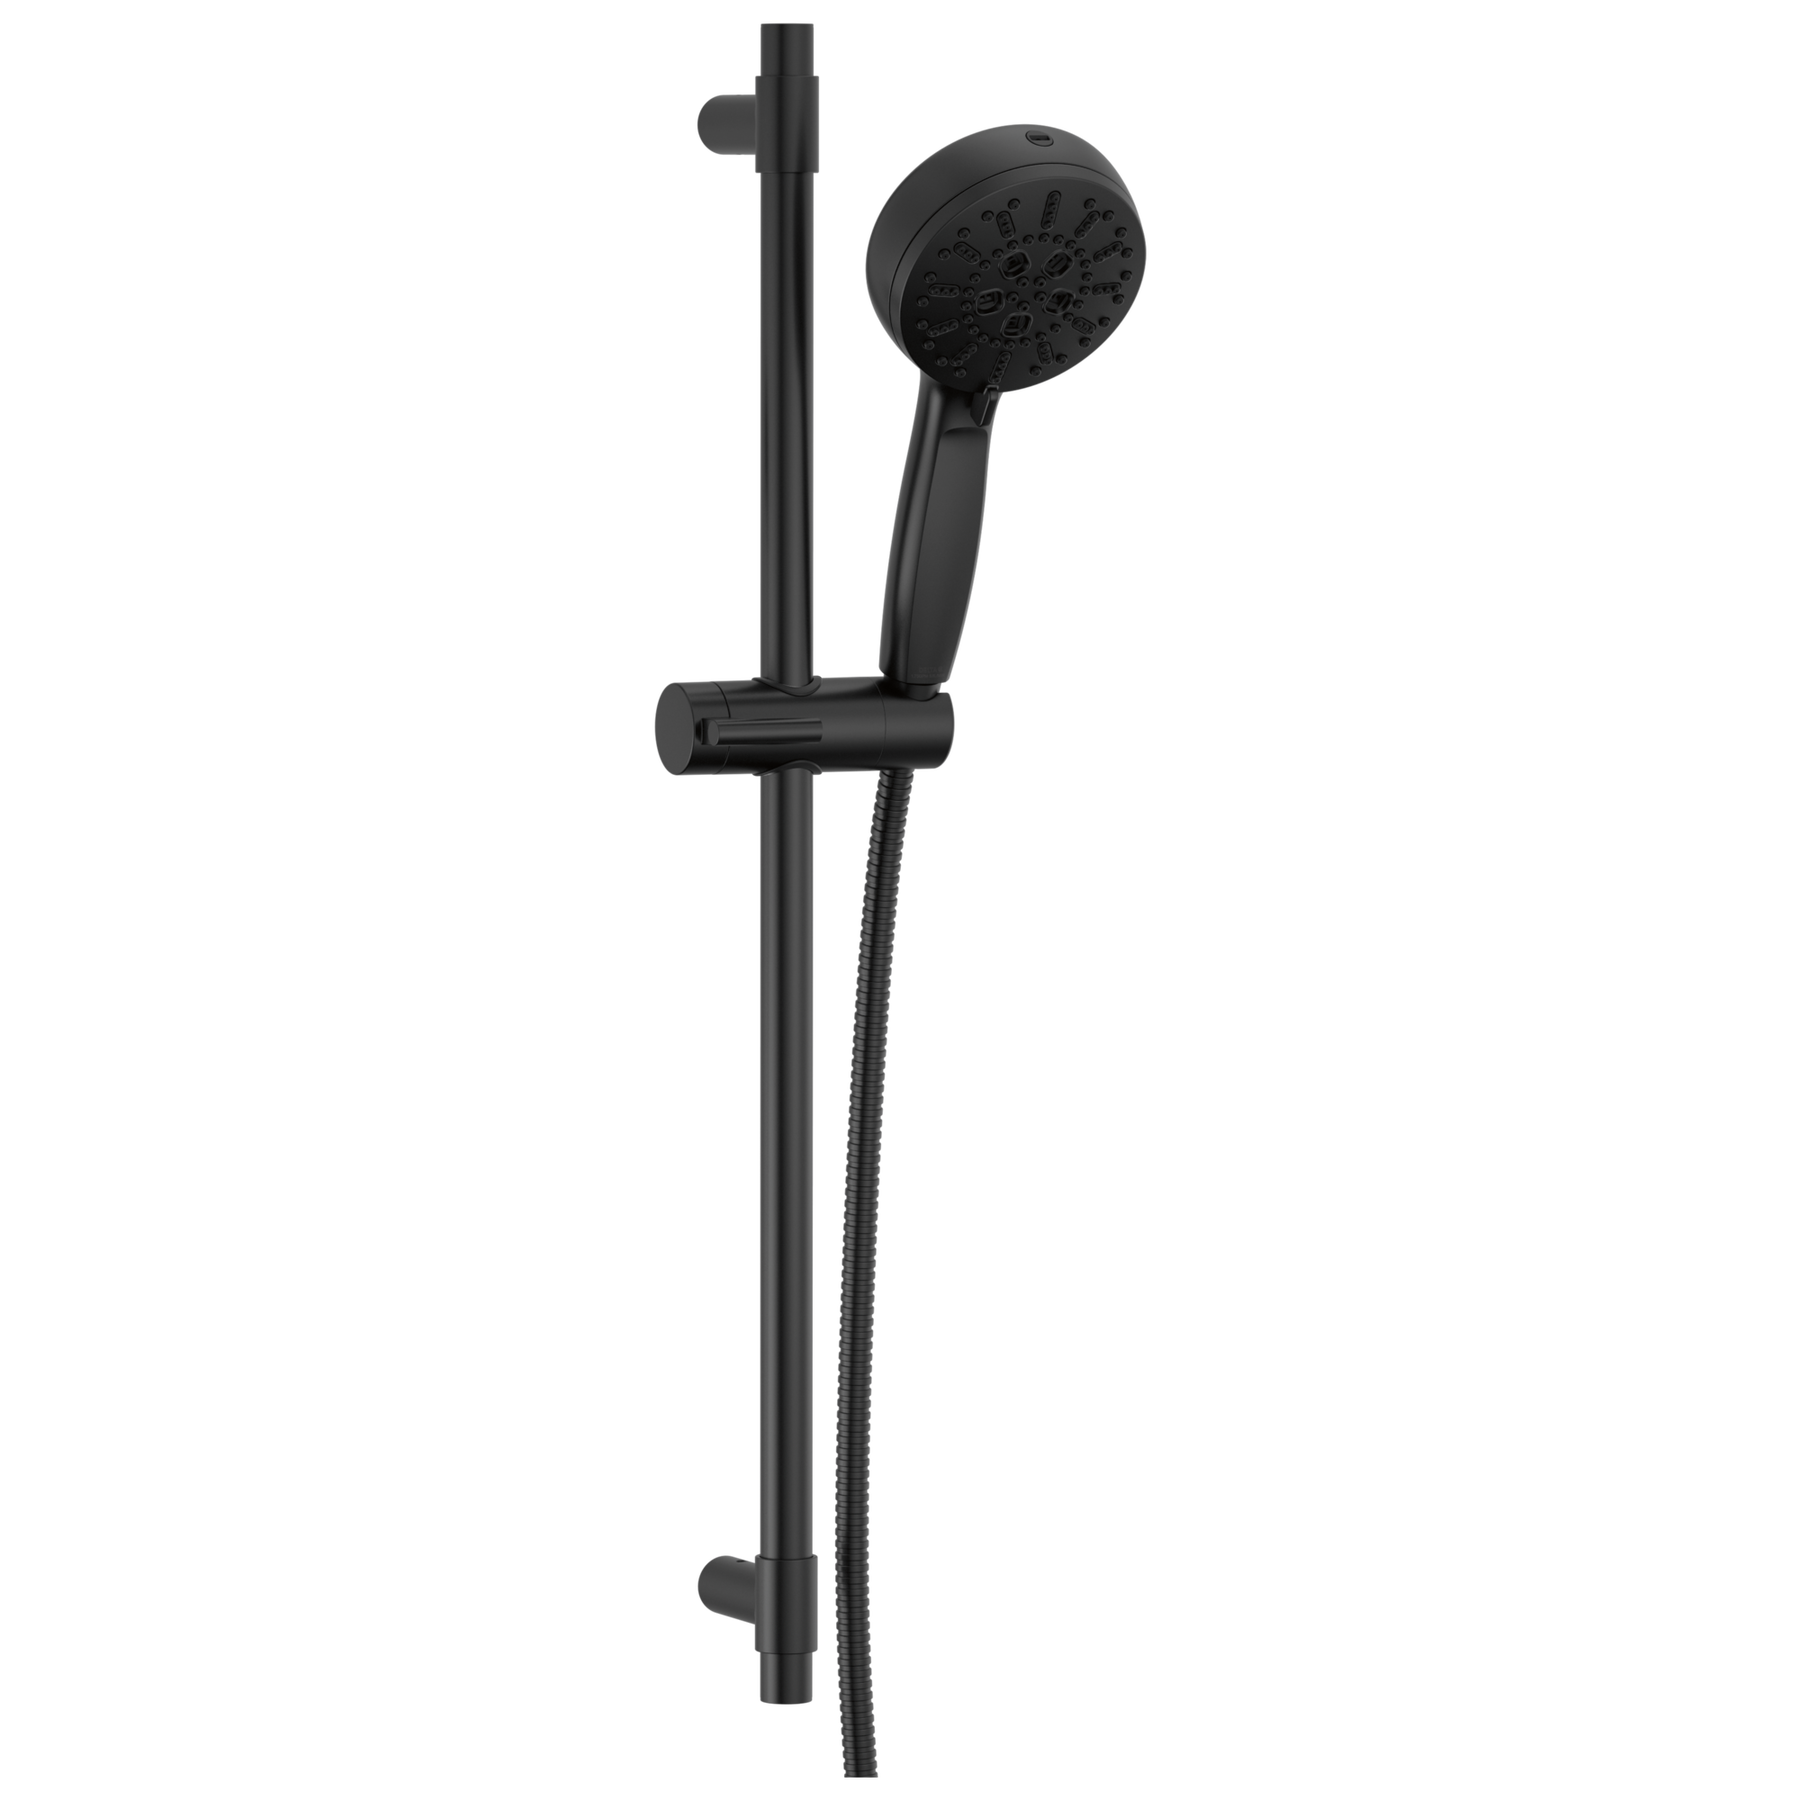 7-Setting Slide Bar Hand Shower with Cleaning Spray in Matte Black 51584-BL